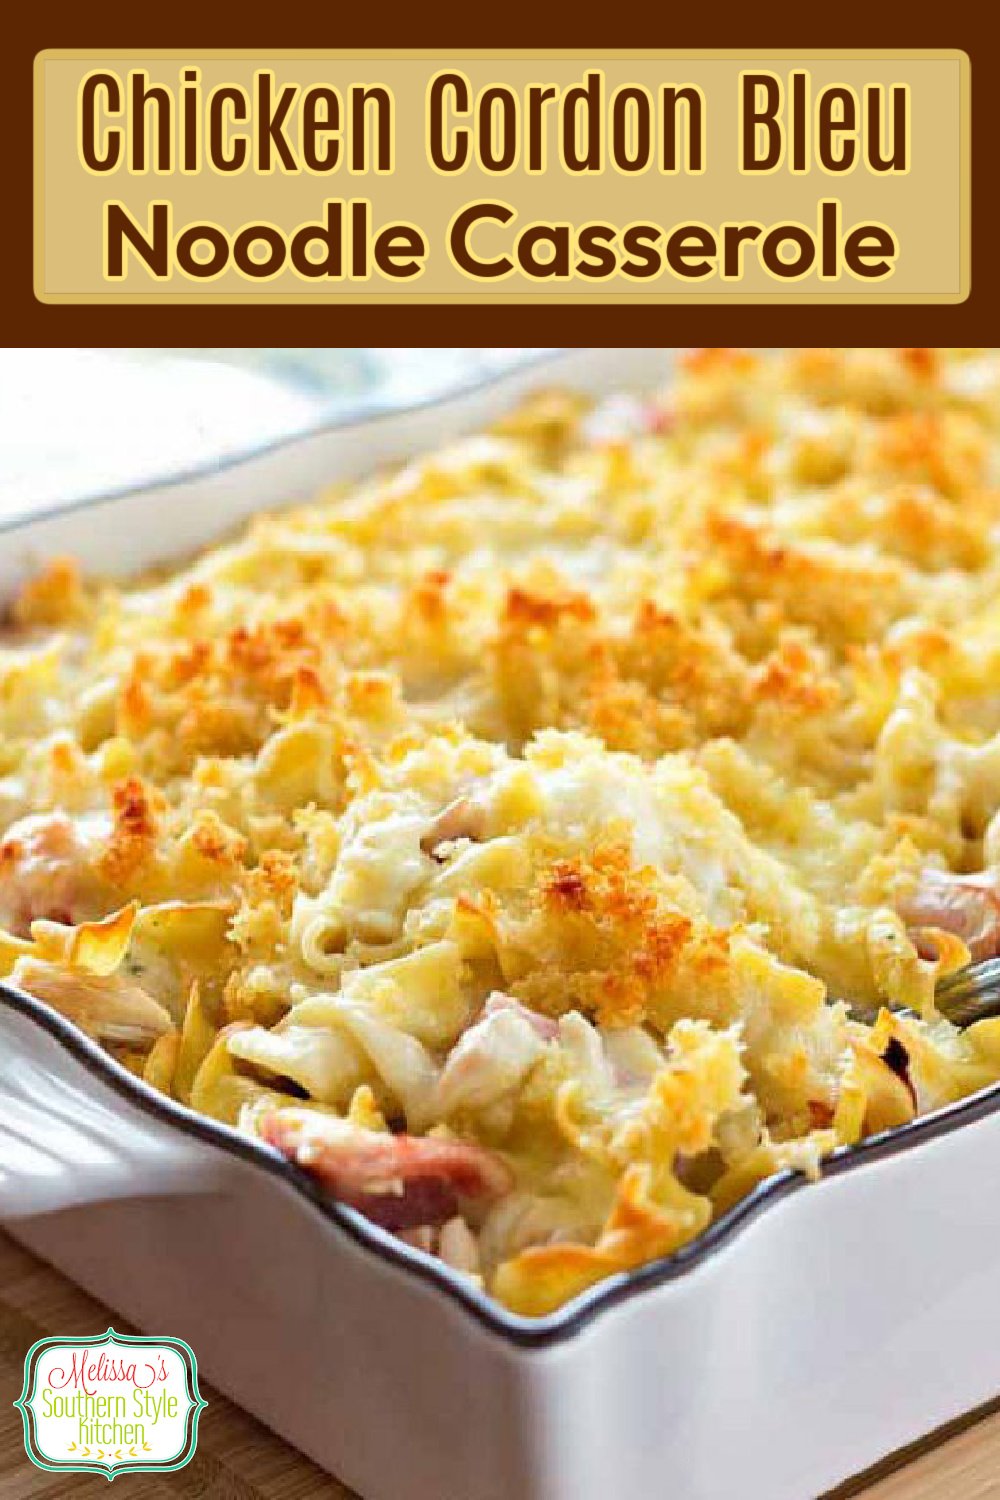 Chicken Cordon Bleu Noodle Casserole takes classic flavors and transforms then them into a family friendly meal #easychickenrecipes #chickencasseroles #chickencordonbleu #chickennoodlecasserole #noodles #noodlerecipes #pasta via @melissasssk